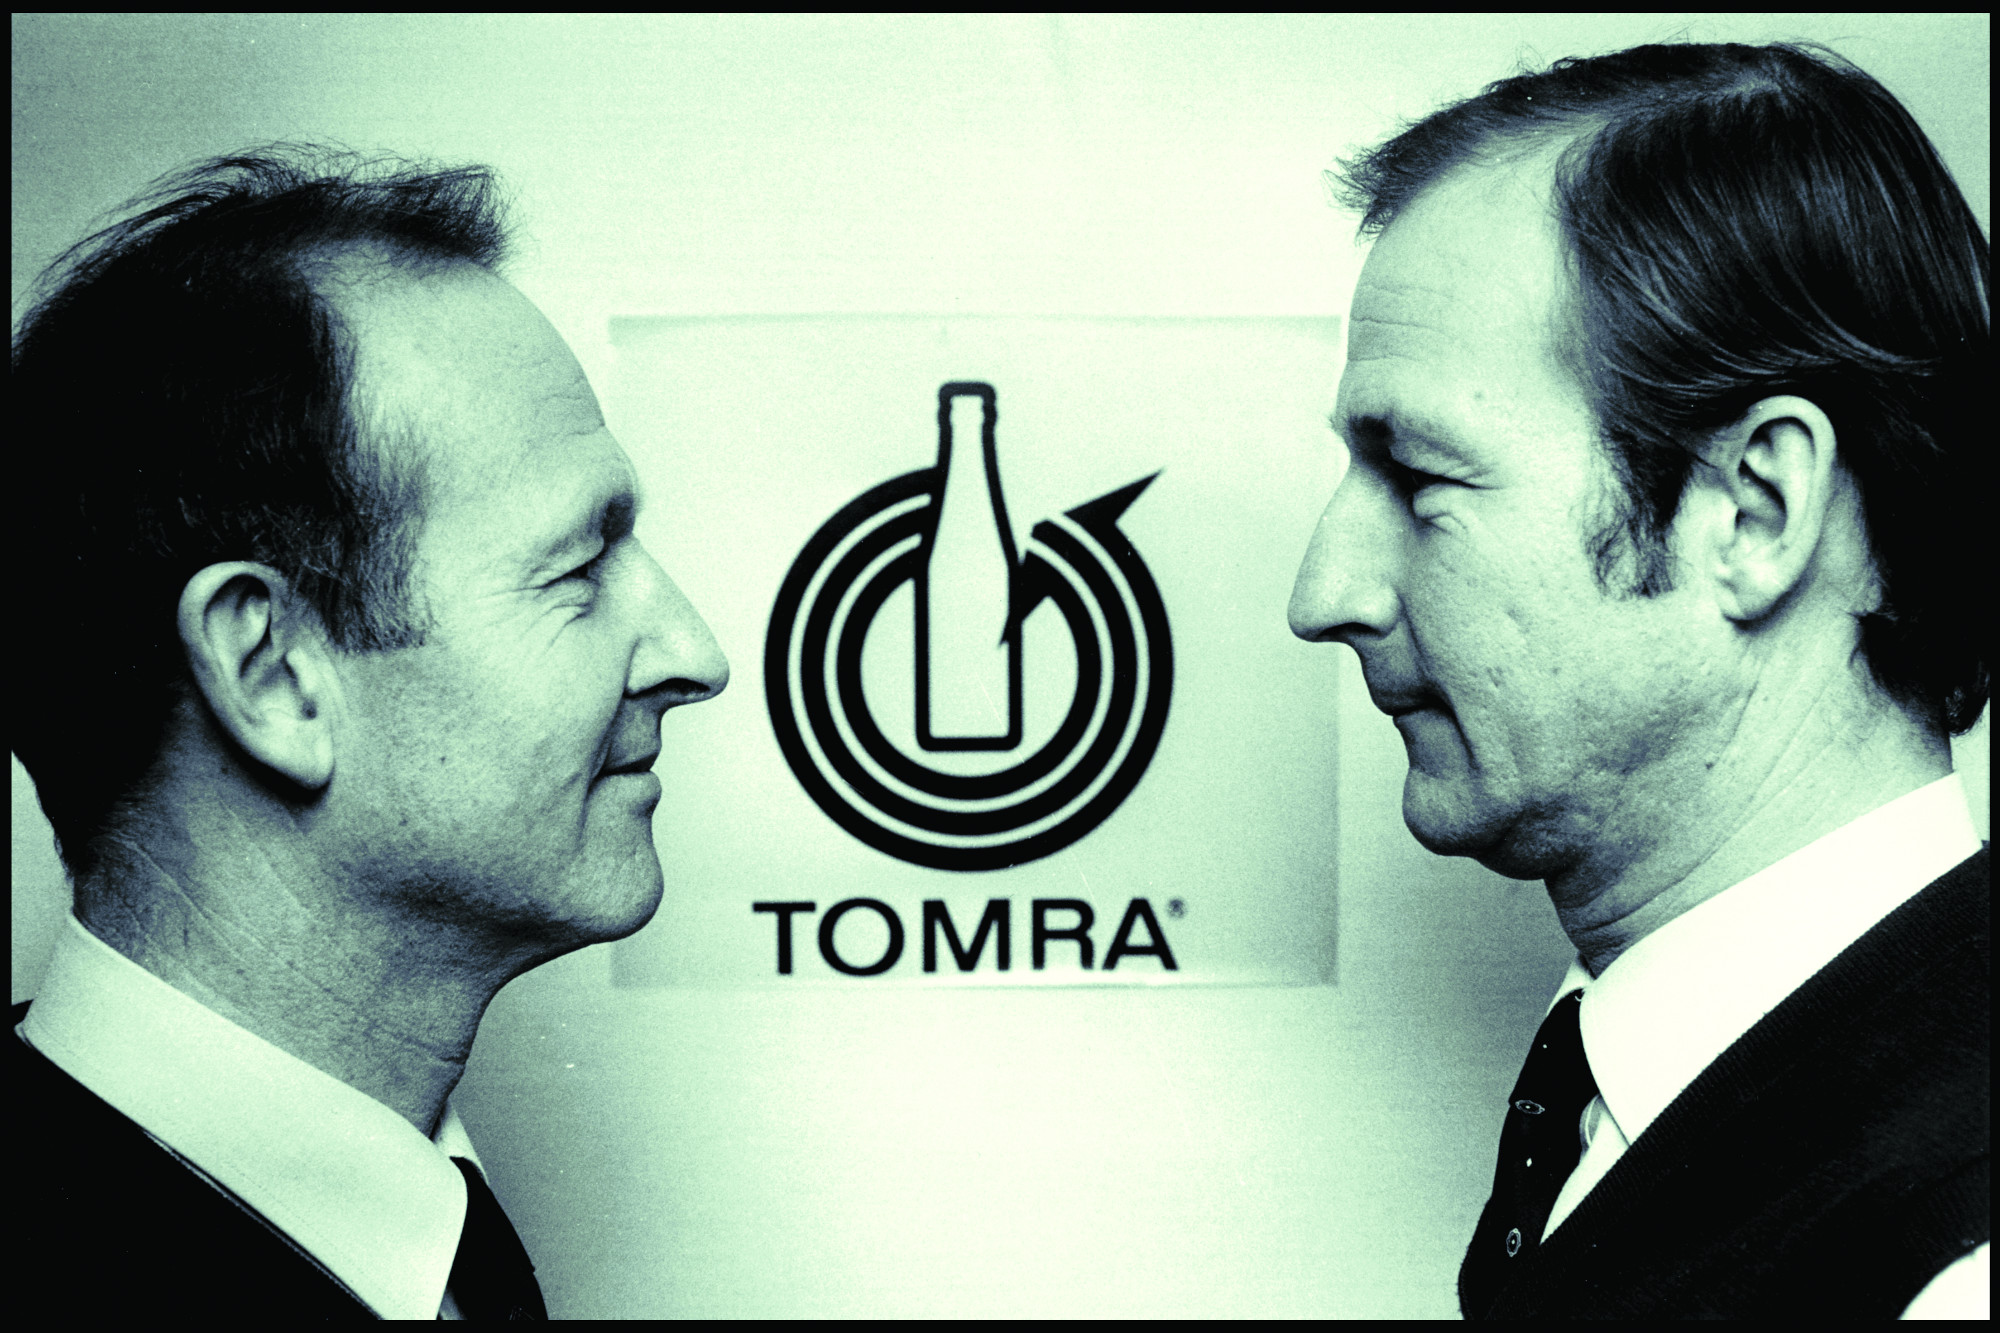 TOMRA founders Petter and Tore Planke standing in front of original TOMRA logo-1